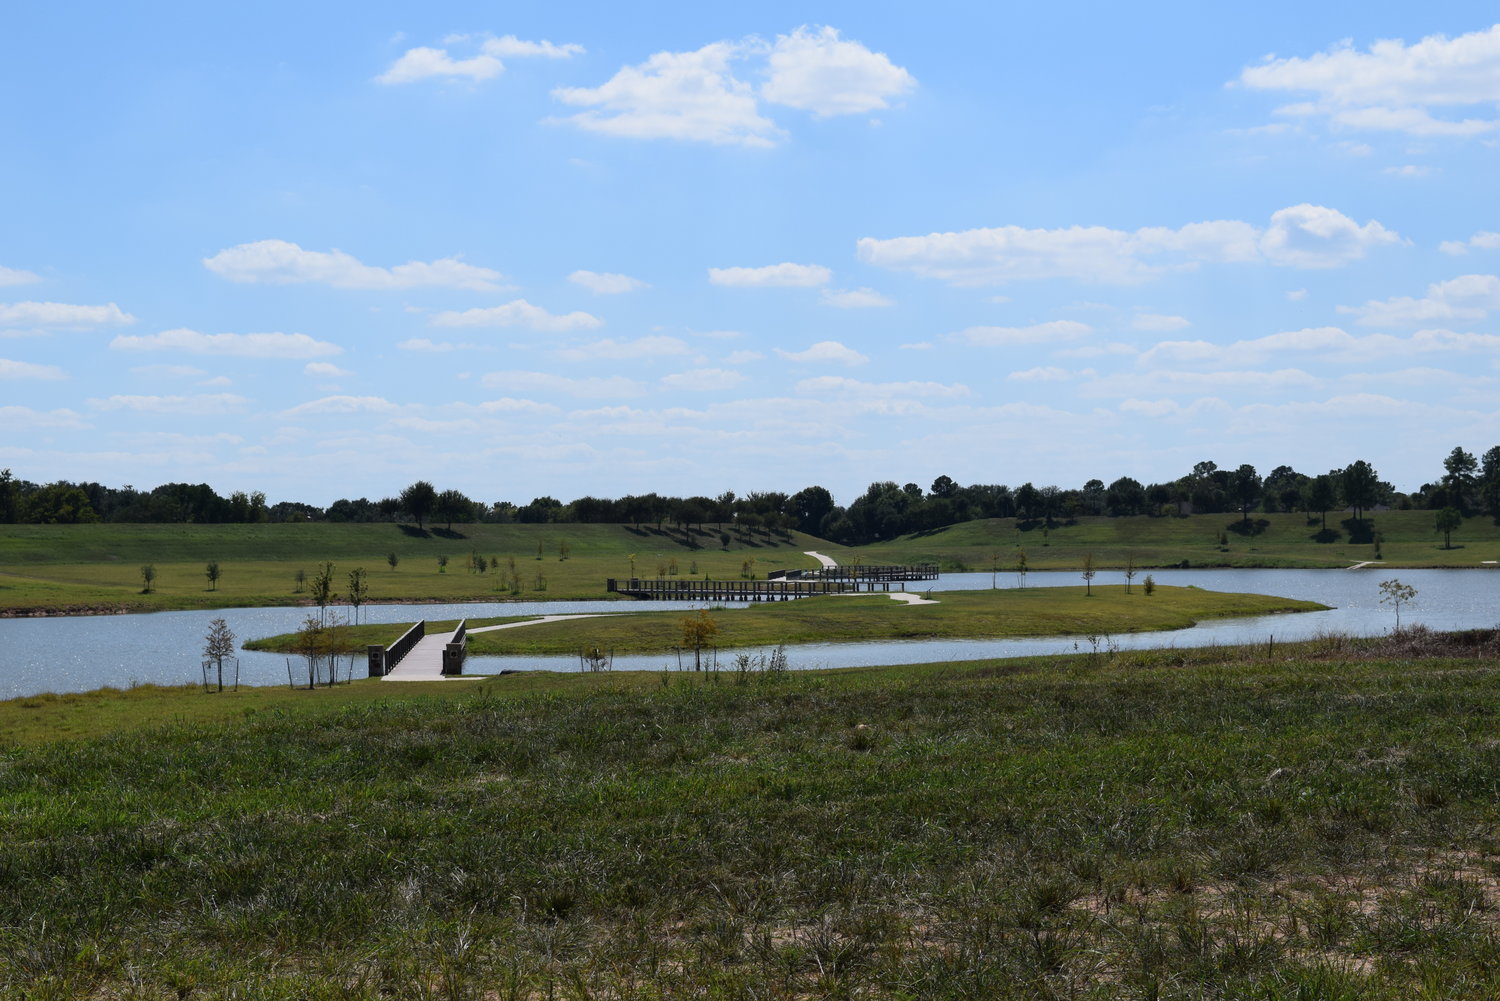 A large pond with native vegetation and walking trails is part of the parkland in the Katy Boardwalk District. The inclusion of Method Architecture will help planners on the project ensure that lakefront views are optimized for visitors and for Katy residents who are expected to use the area as a city park.